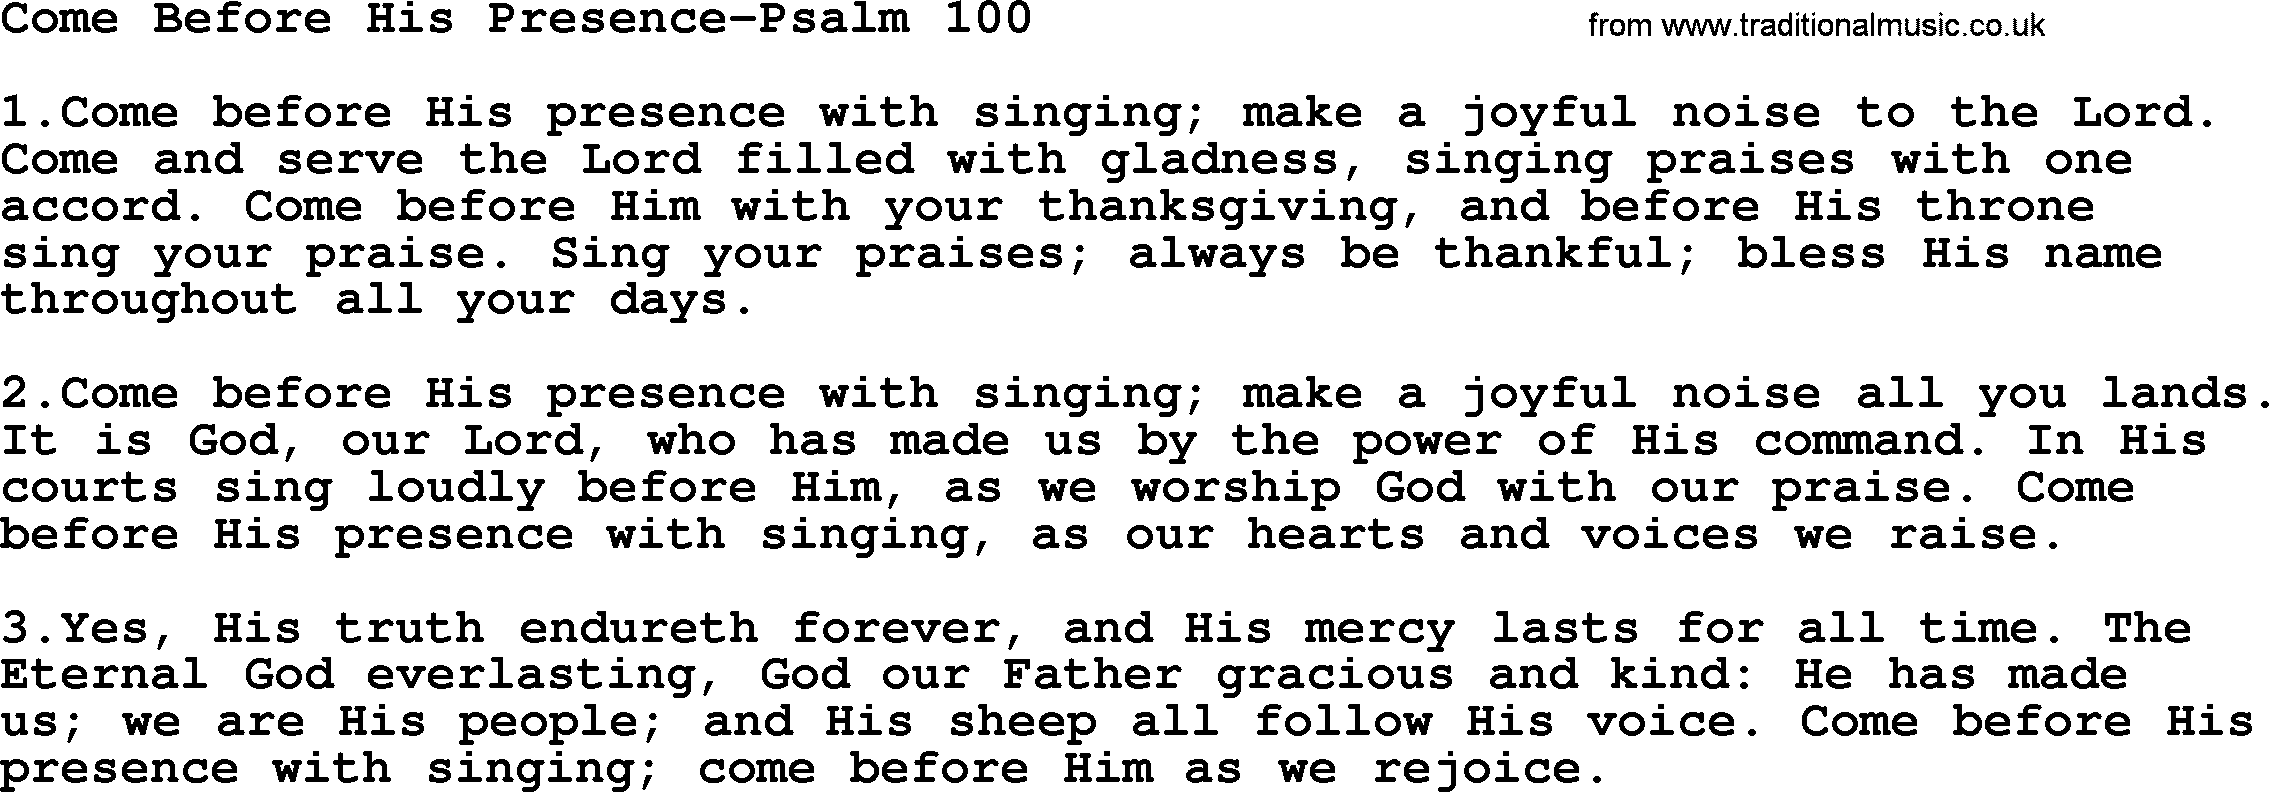 Hymns from the Psalms, Hymn: Come Before His Presence-Psalm 100, lyrics with PDF